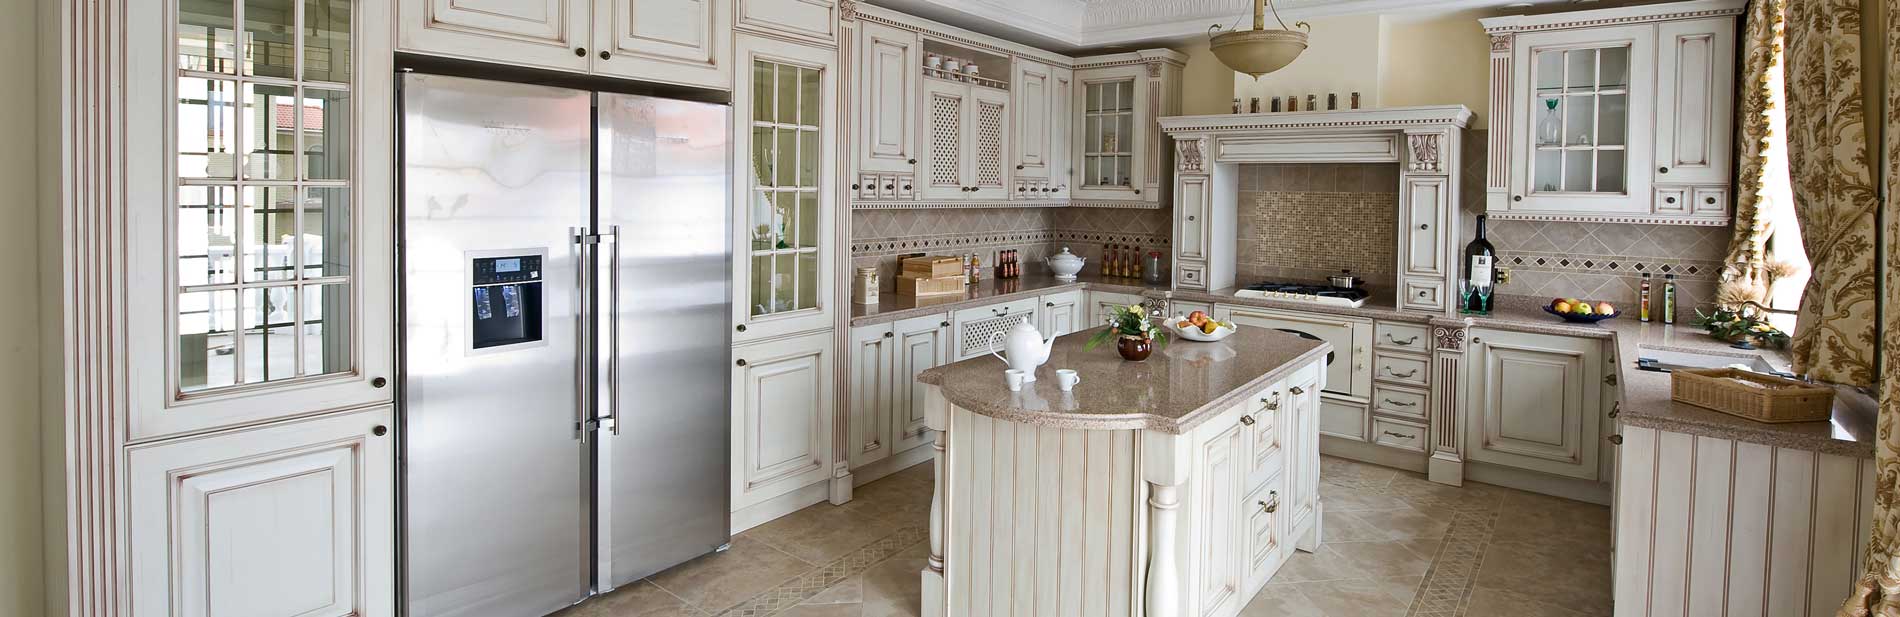 West Palm Beach Remodeling